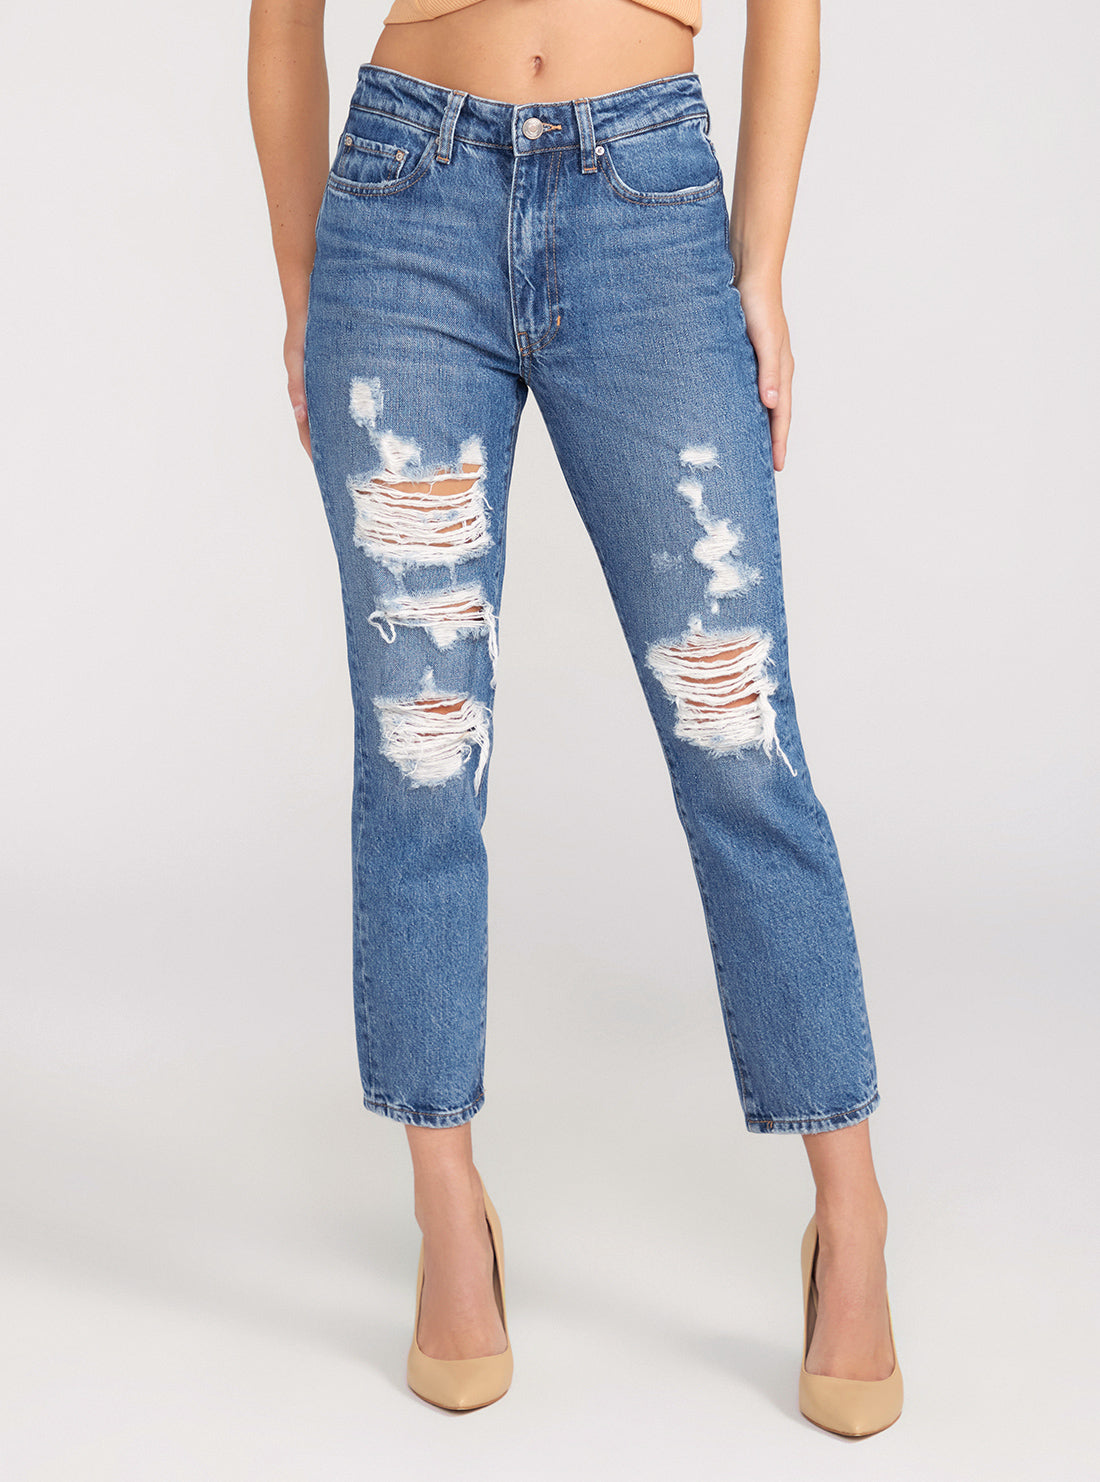 GUESS Mid-Rise Ripped Cropped It Girl Jeans In Medium Wash front view